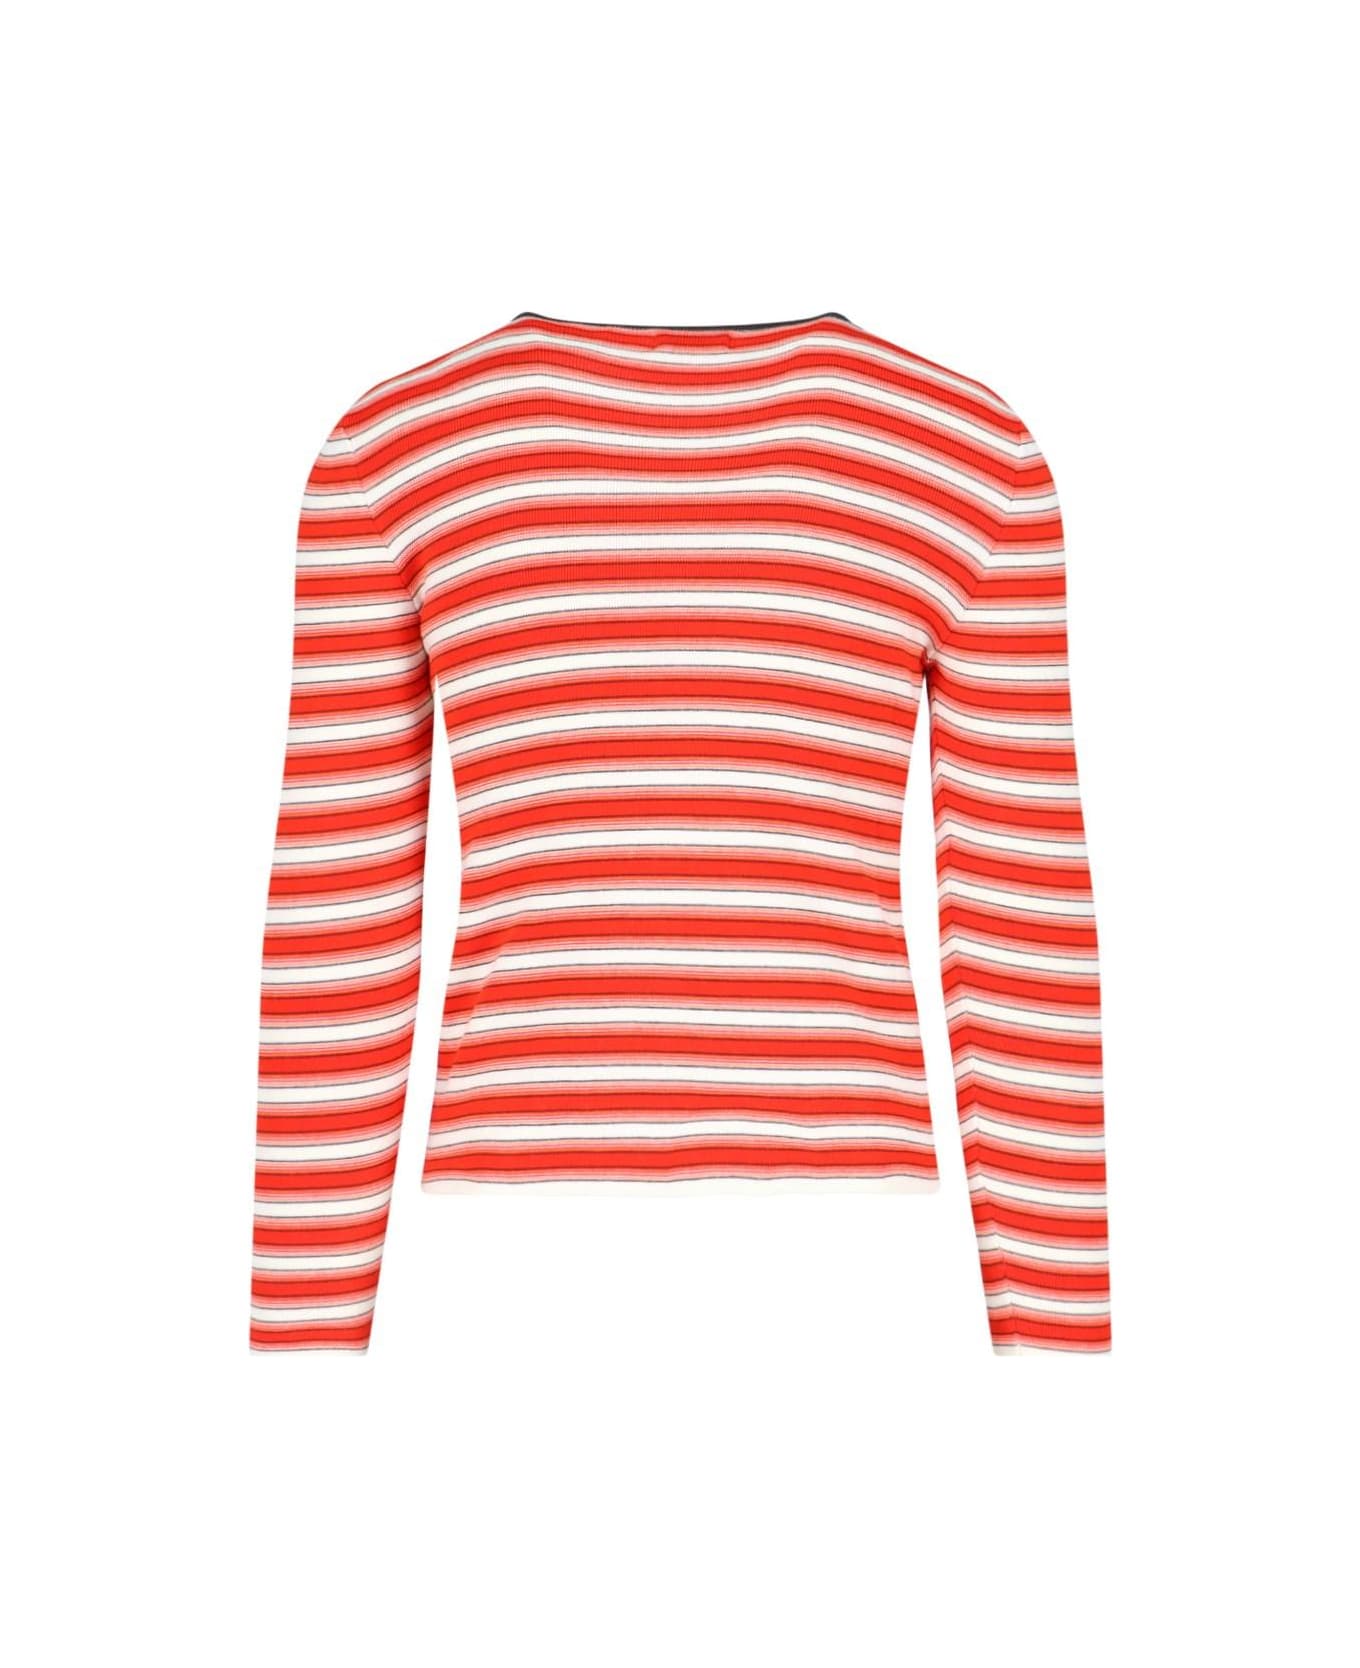 ERL Striped T-shirt - Red